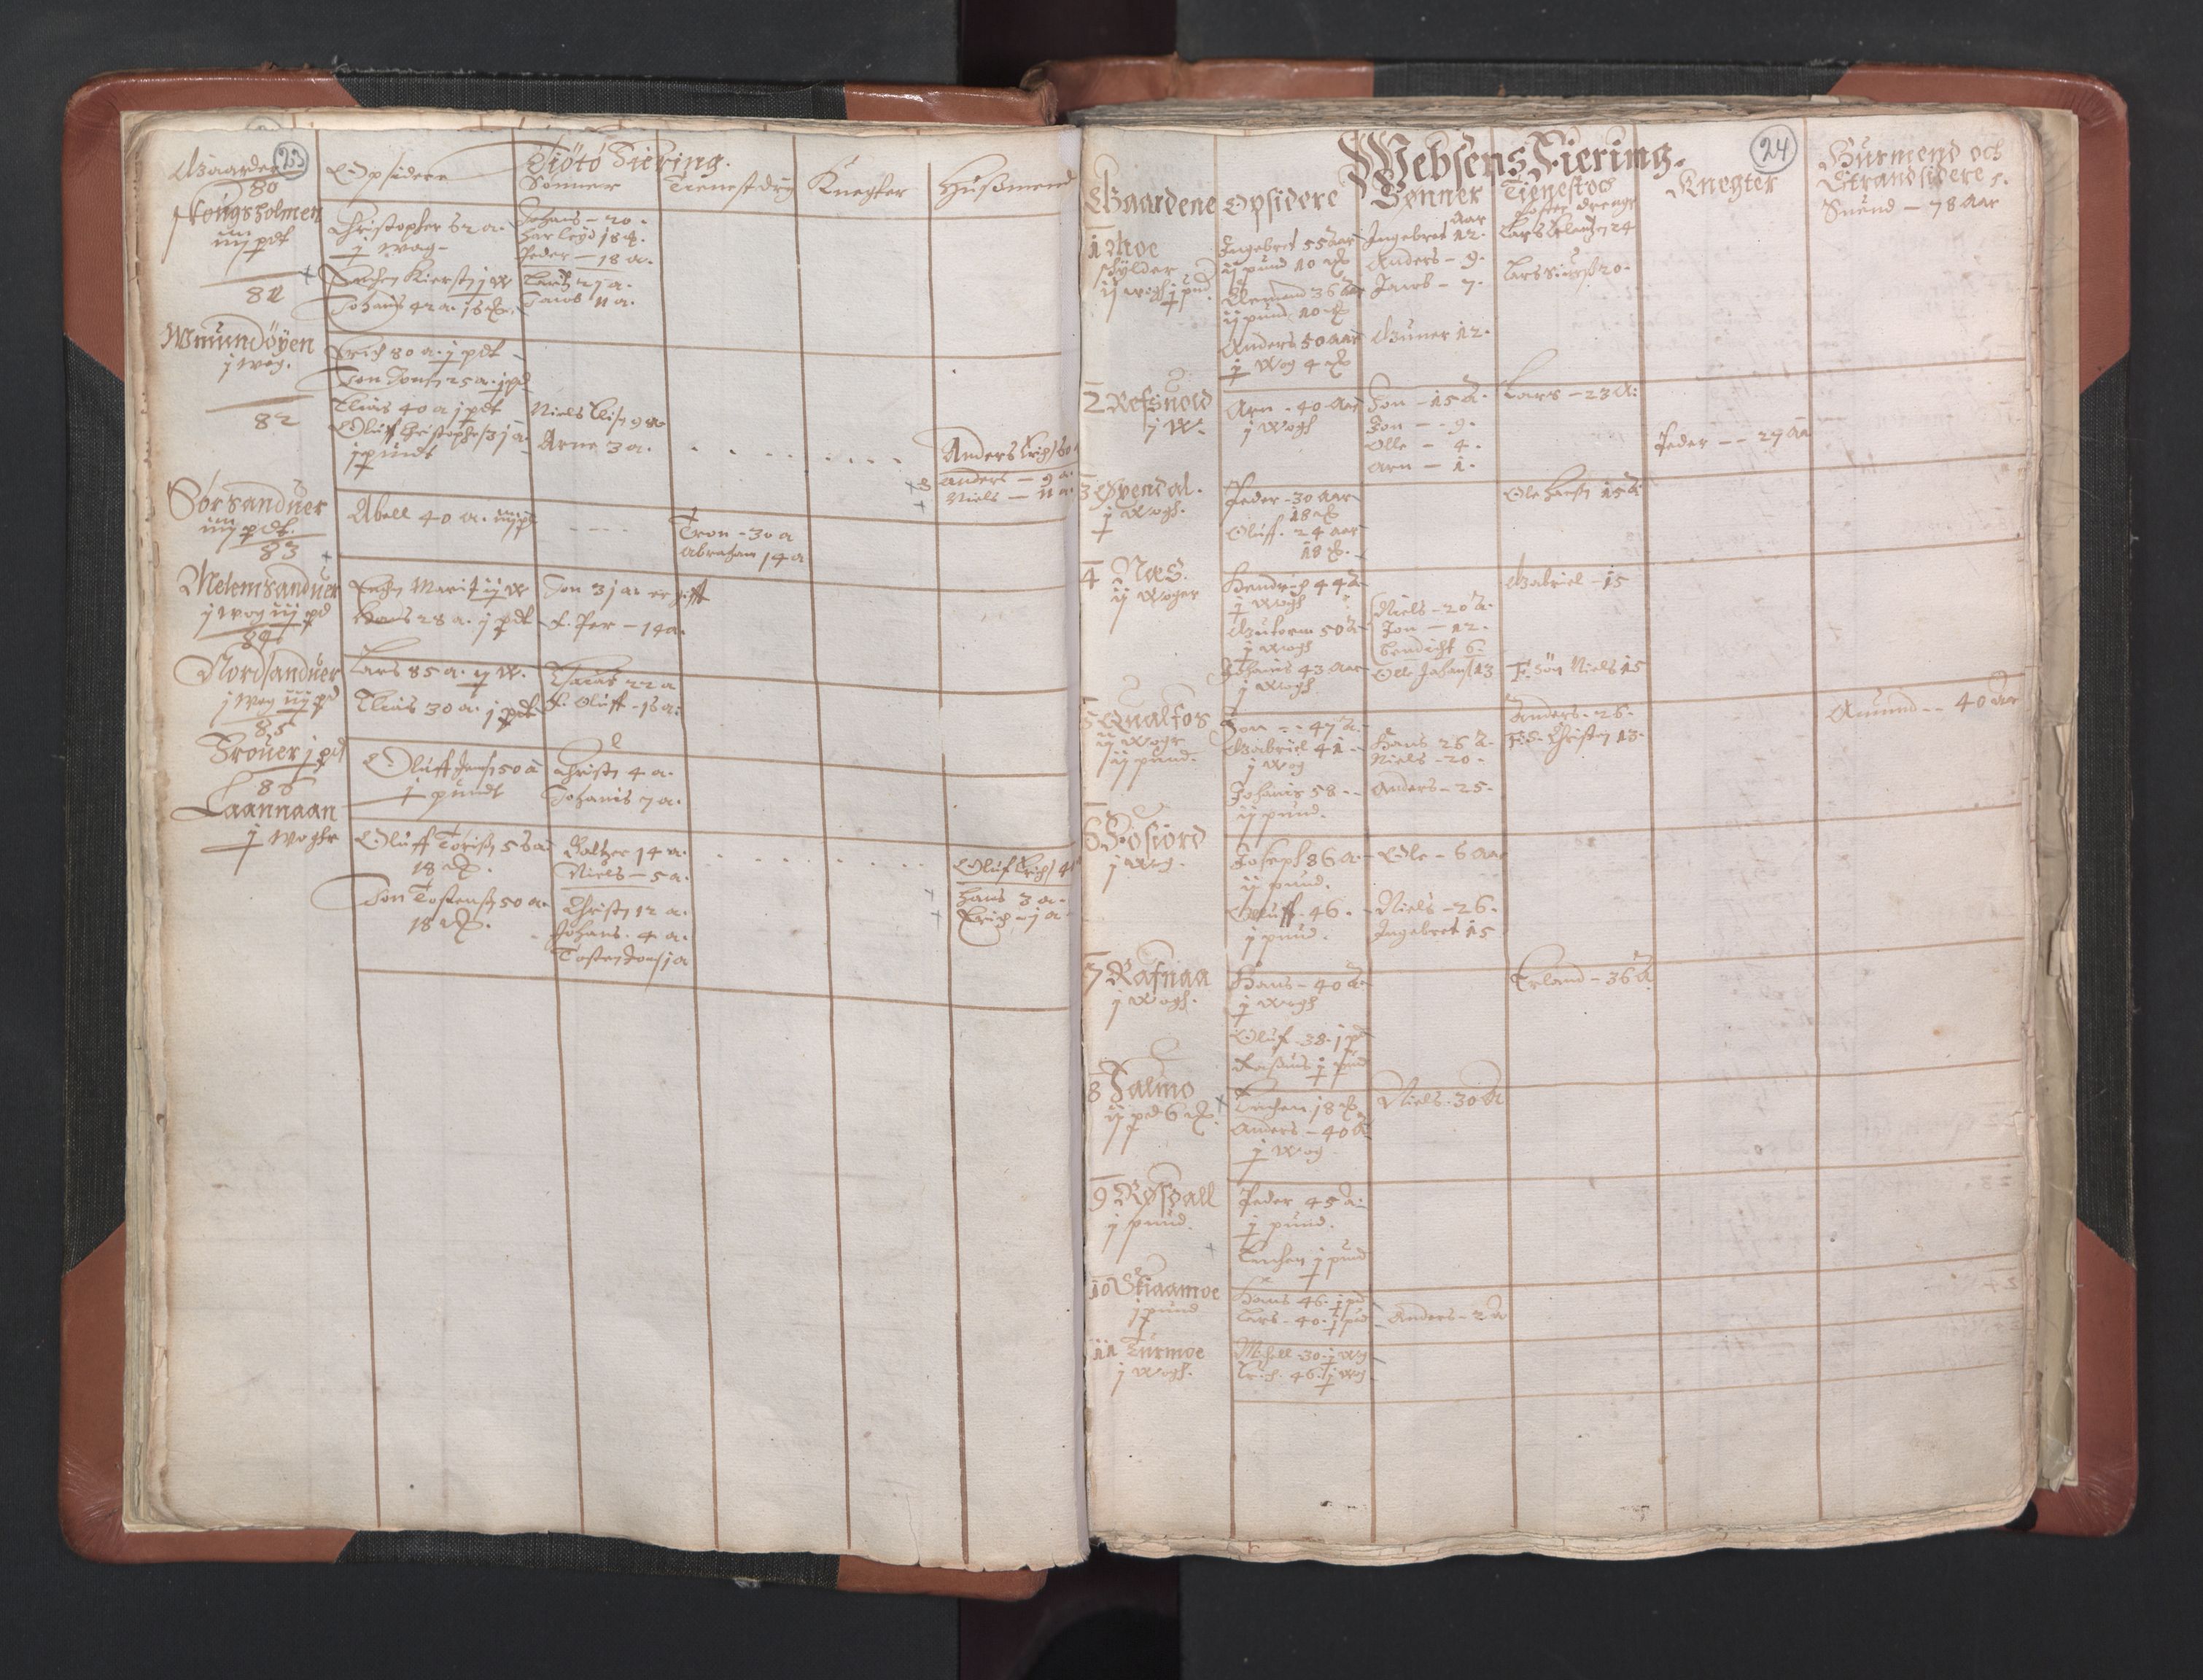 RA, Vicar's Census 1664-1666, no. 35: Helgeland deanery and Salten deanery, 1664-1666, p. 23-24